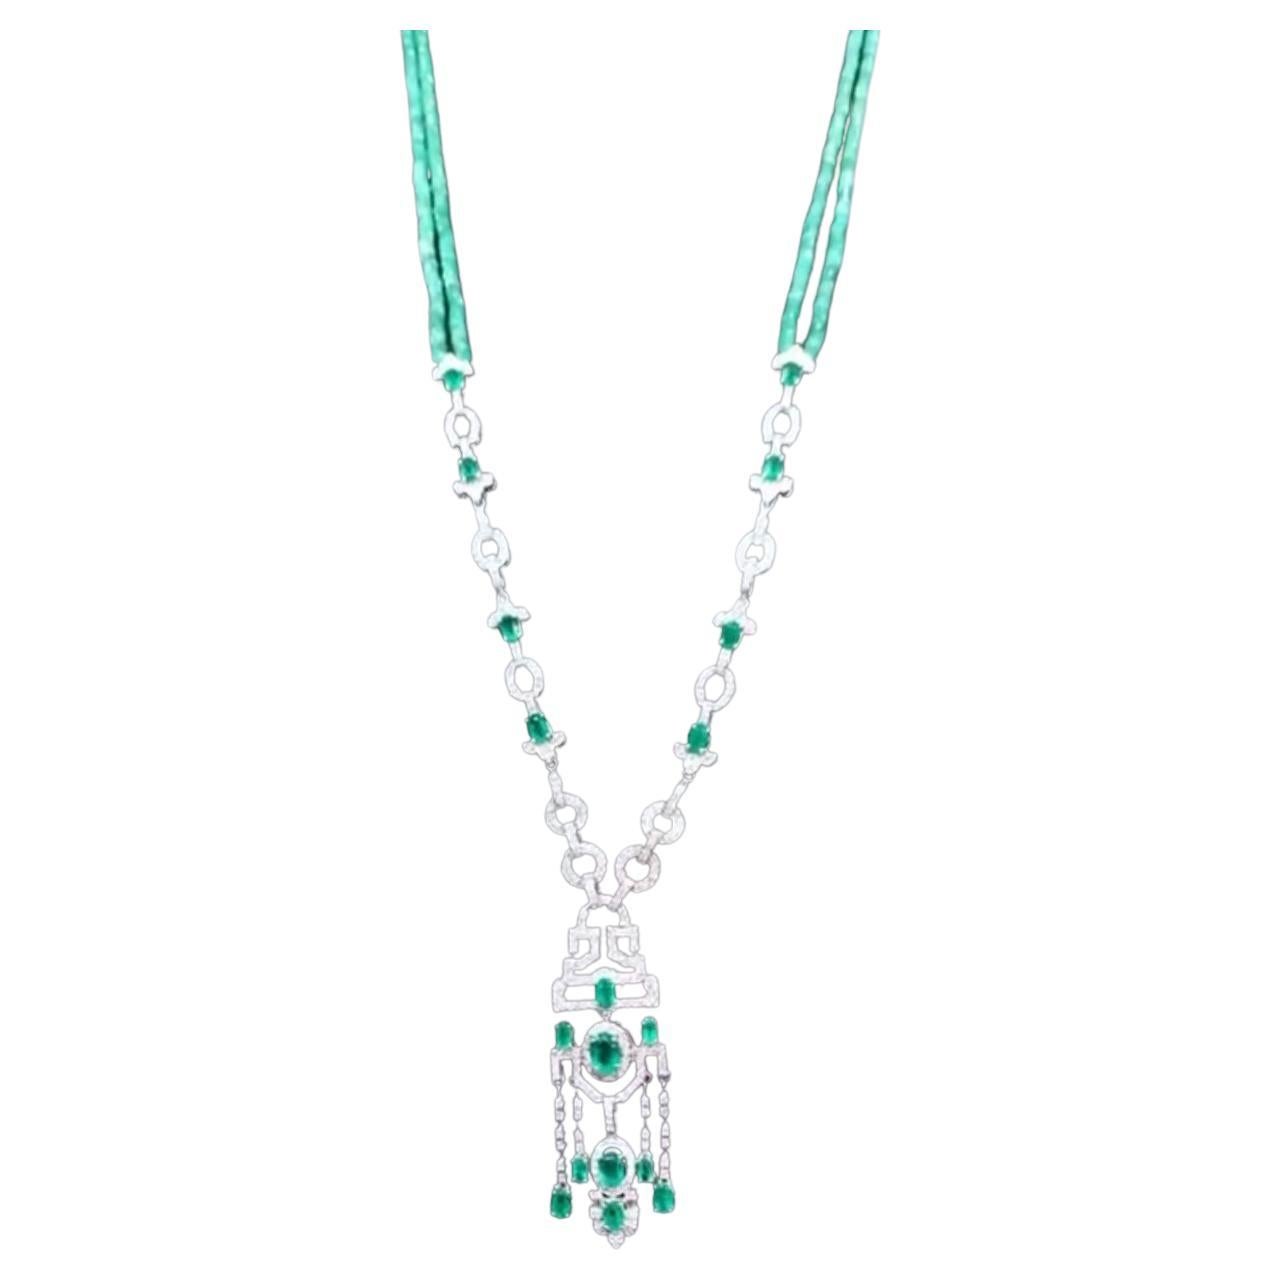 Amazing Art Deco Design with 15.65 Carats of Emeralds and Diamonds on Necklace